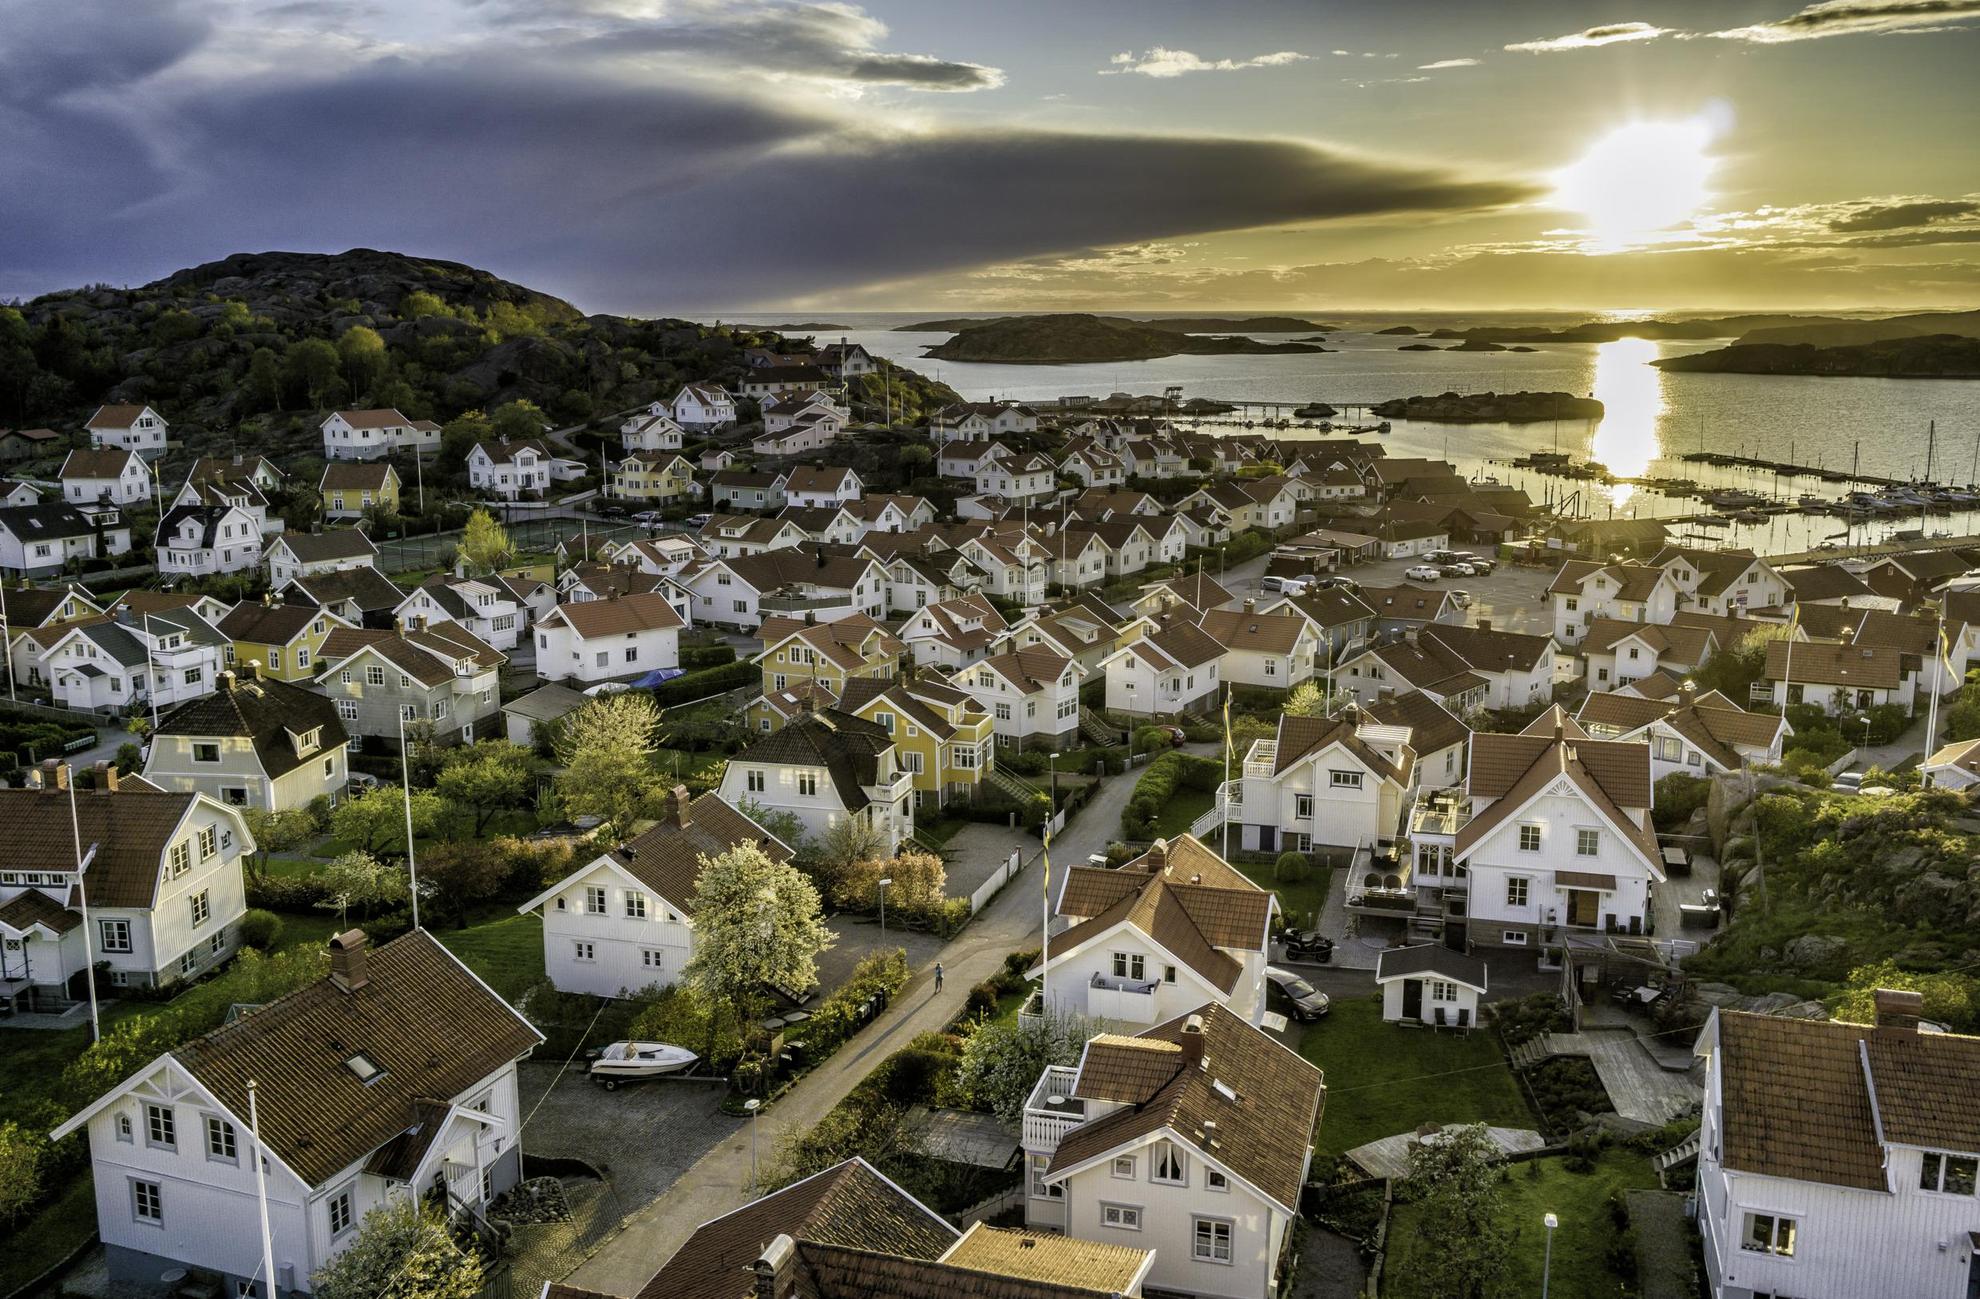 Suburban white houses with tiled roofs overlook the ocean in Bihuslän.